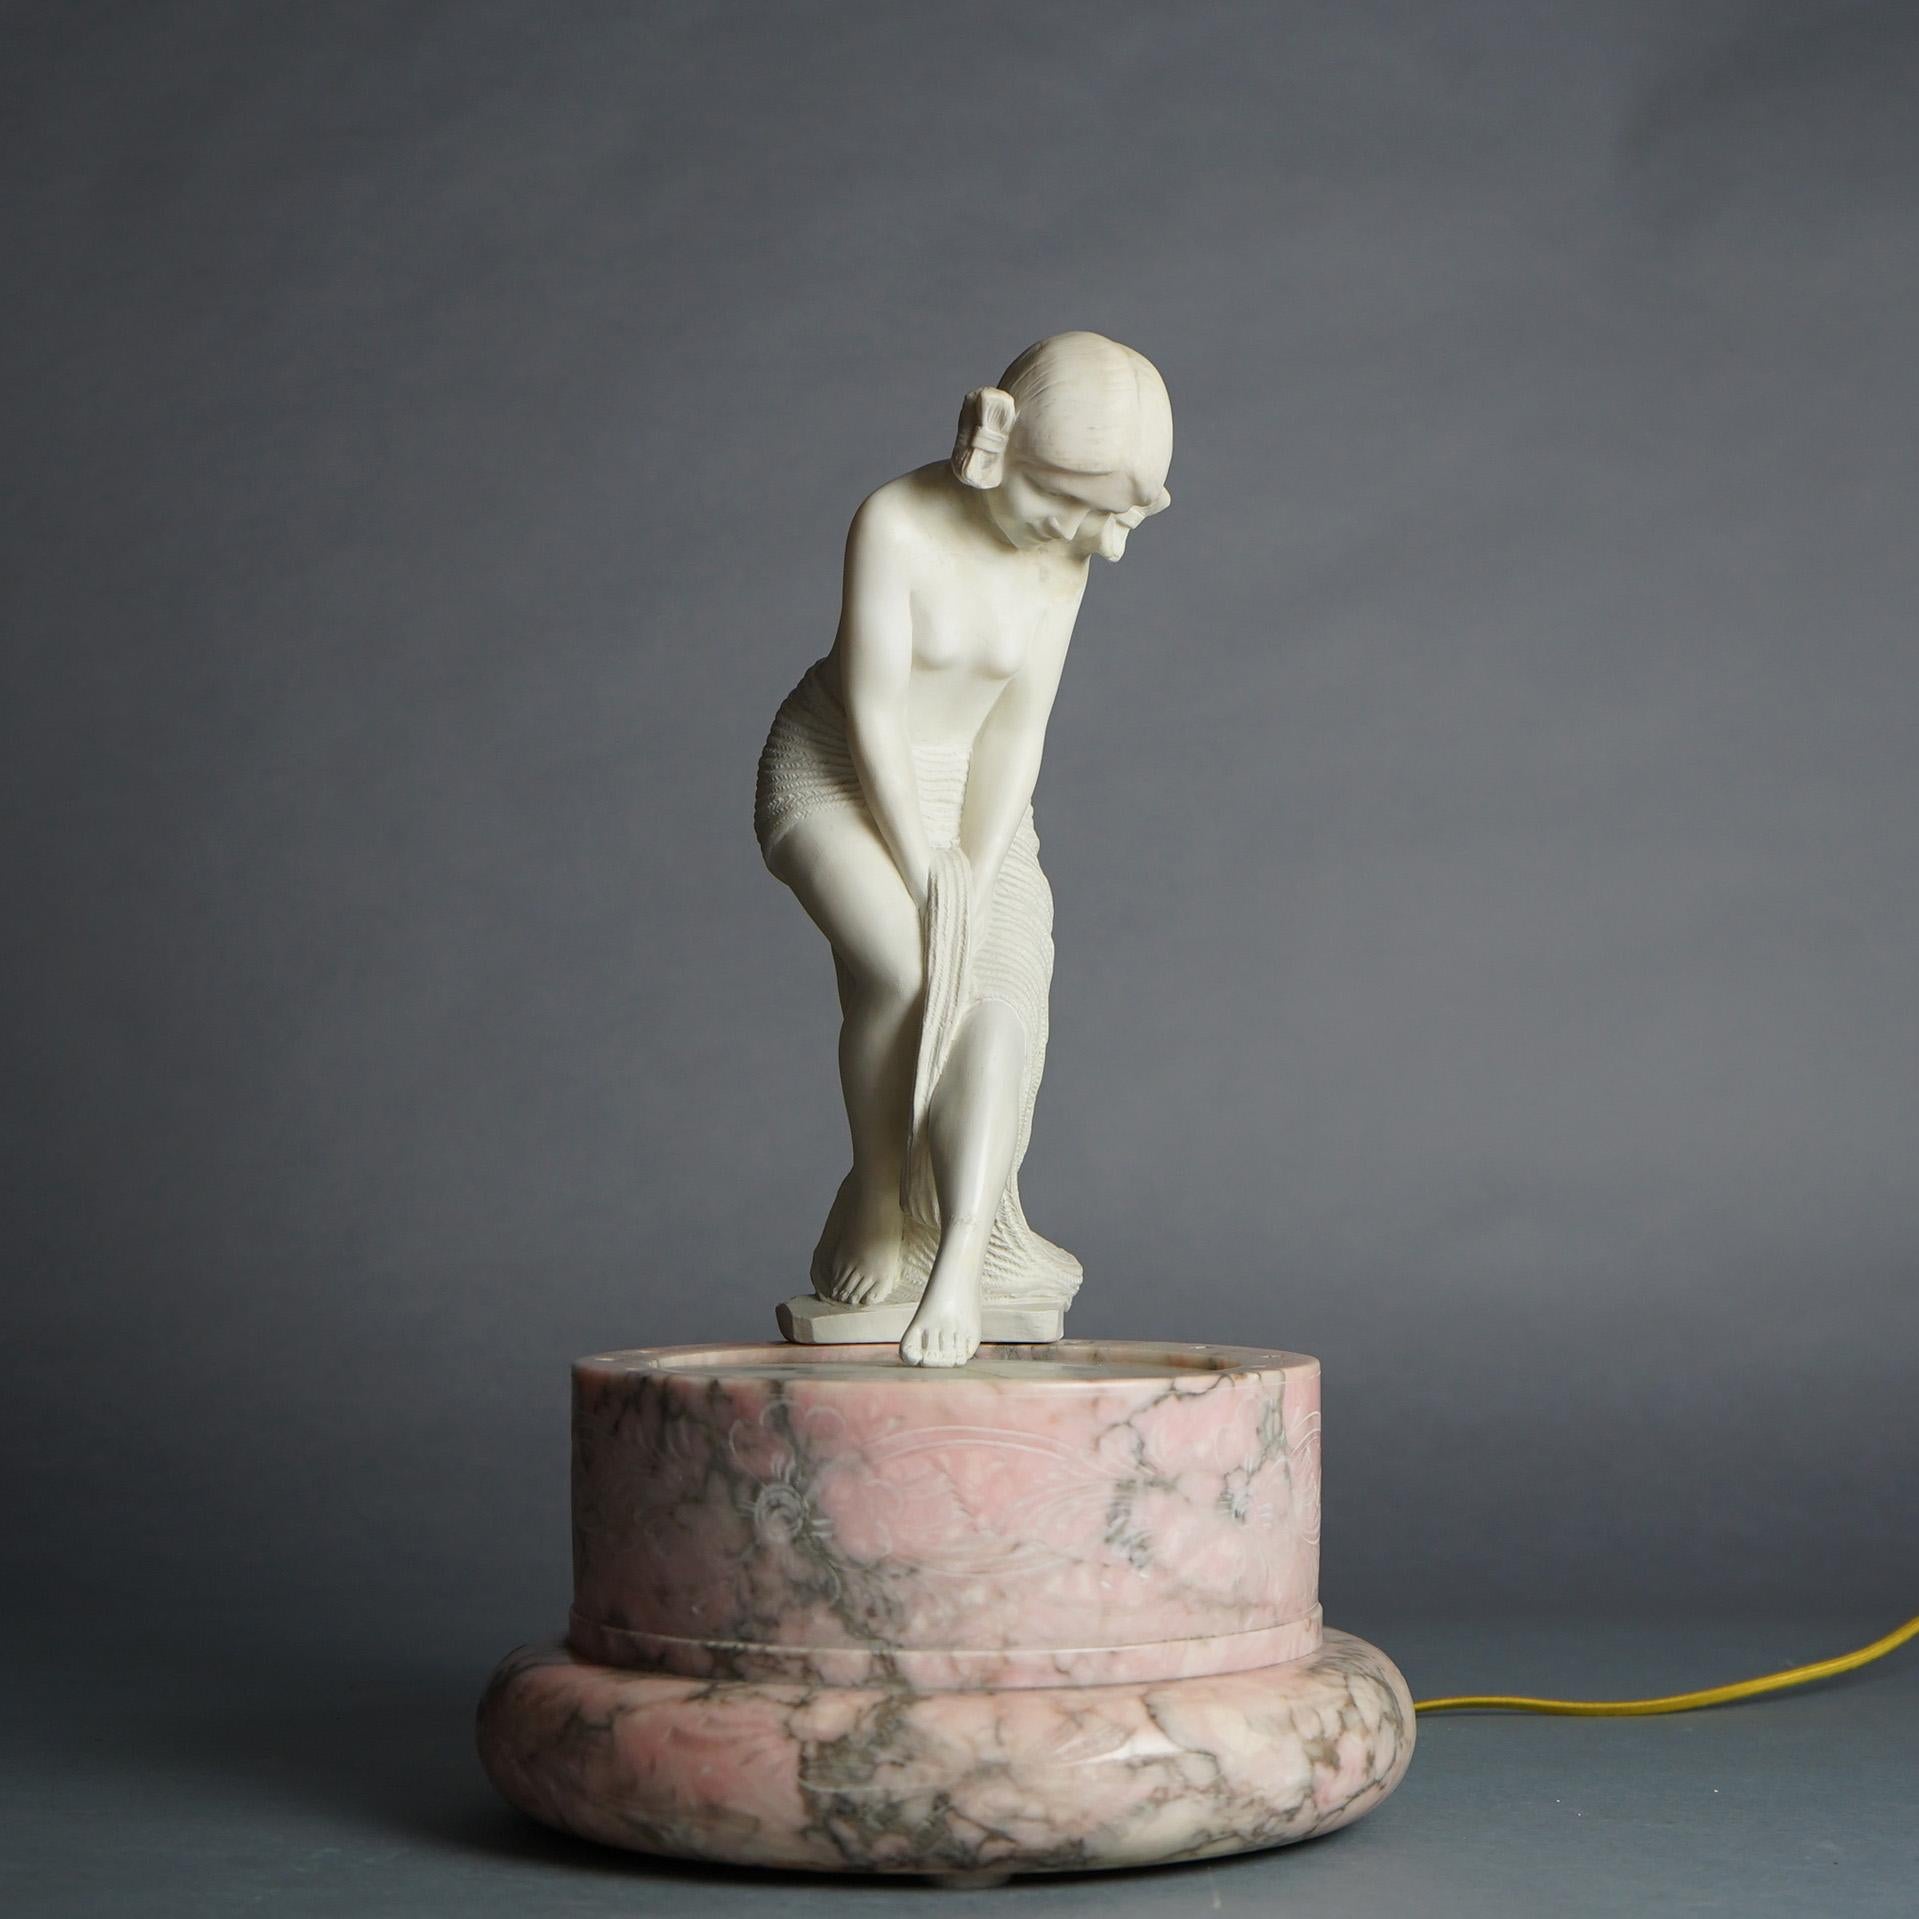 Antique Alabaster Female Nude Bather on Rose Marble Base, Lighted, Signed Galastri, C1900

Measures- 17.75''H x 10.75''W x 10.75''D